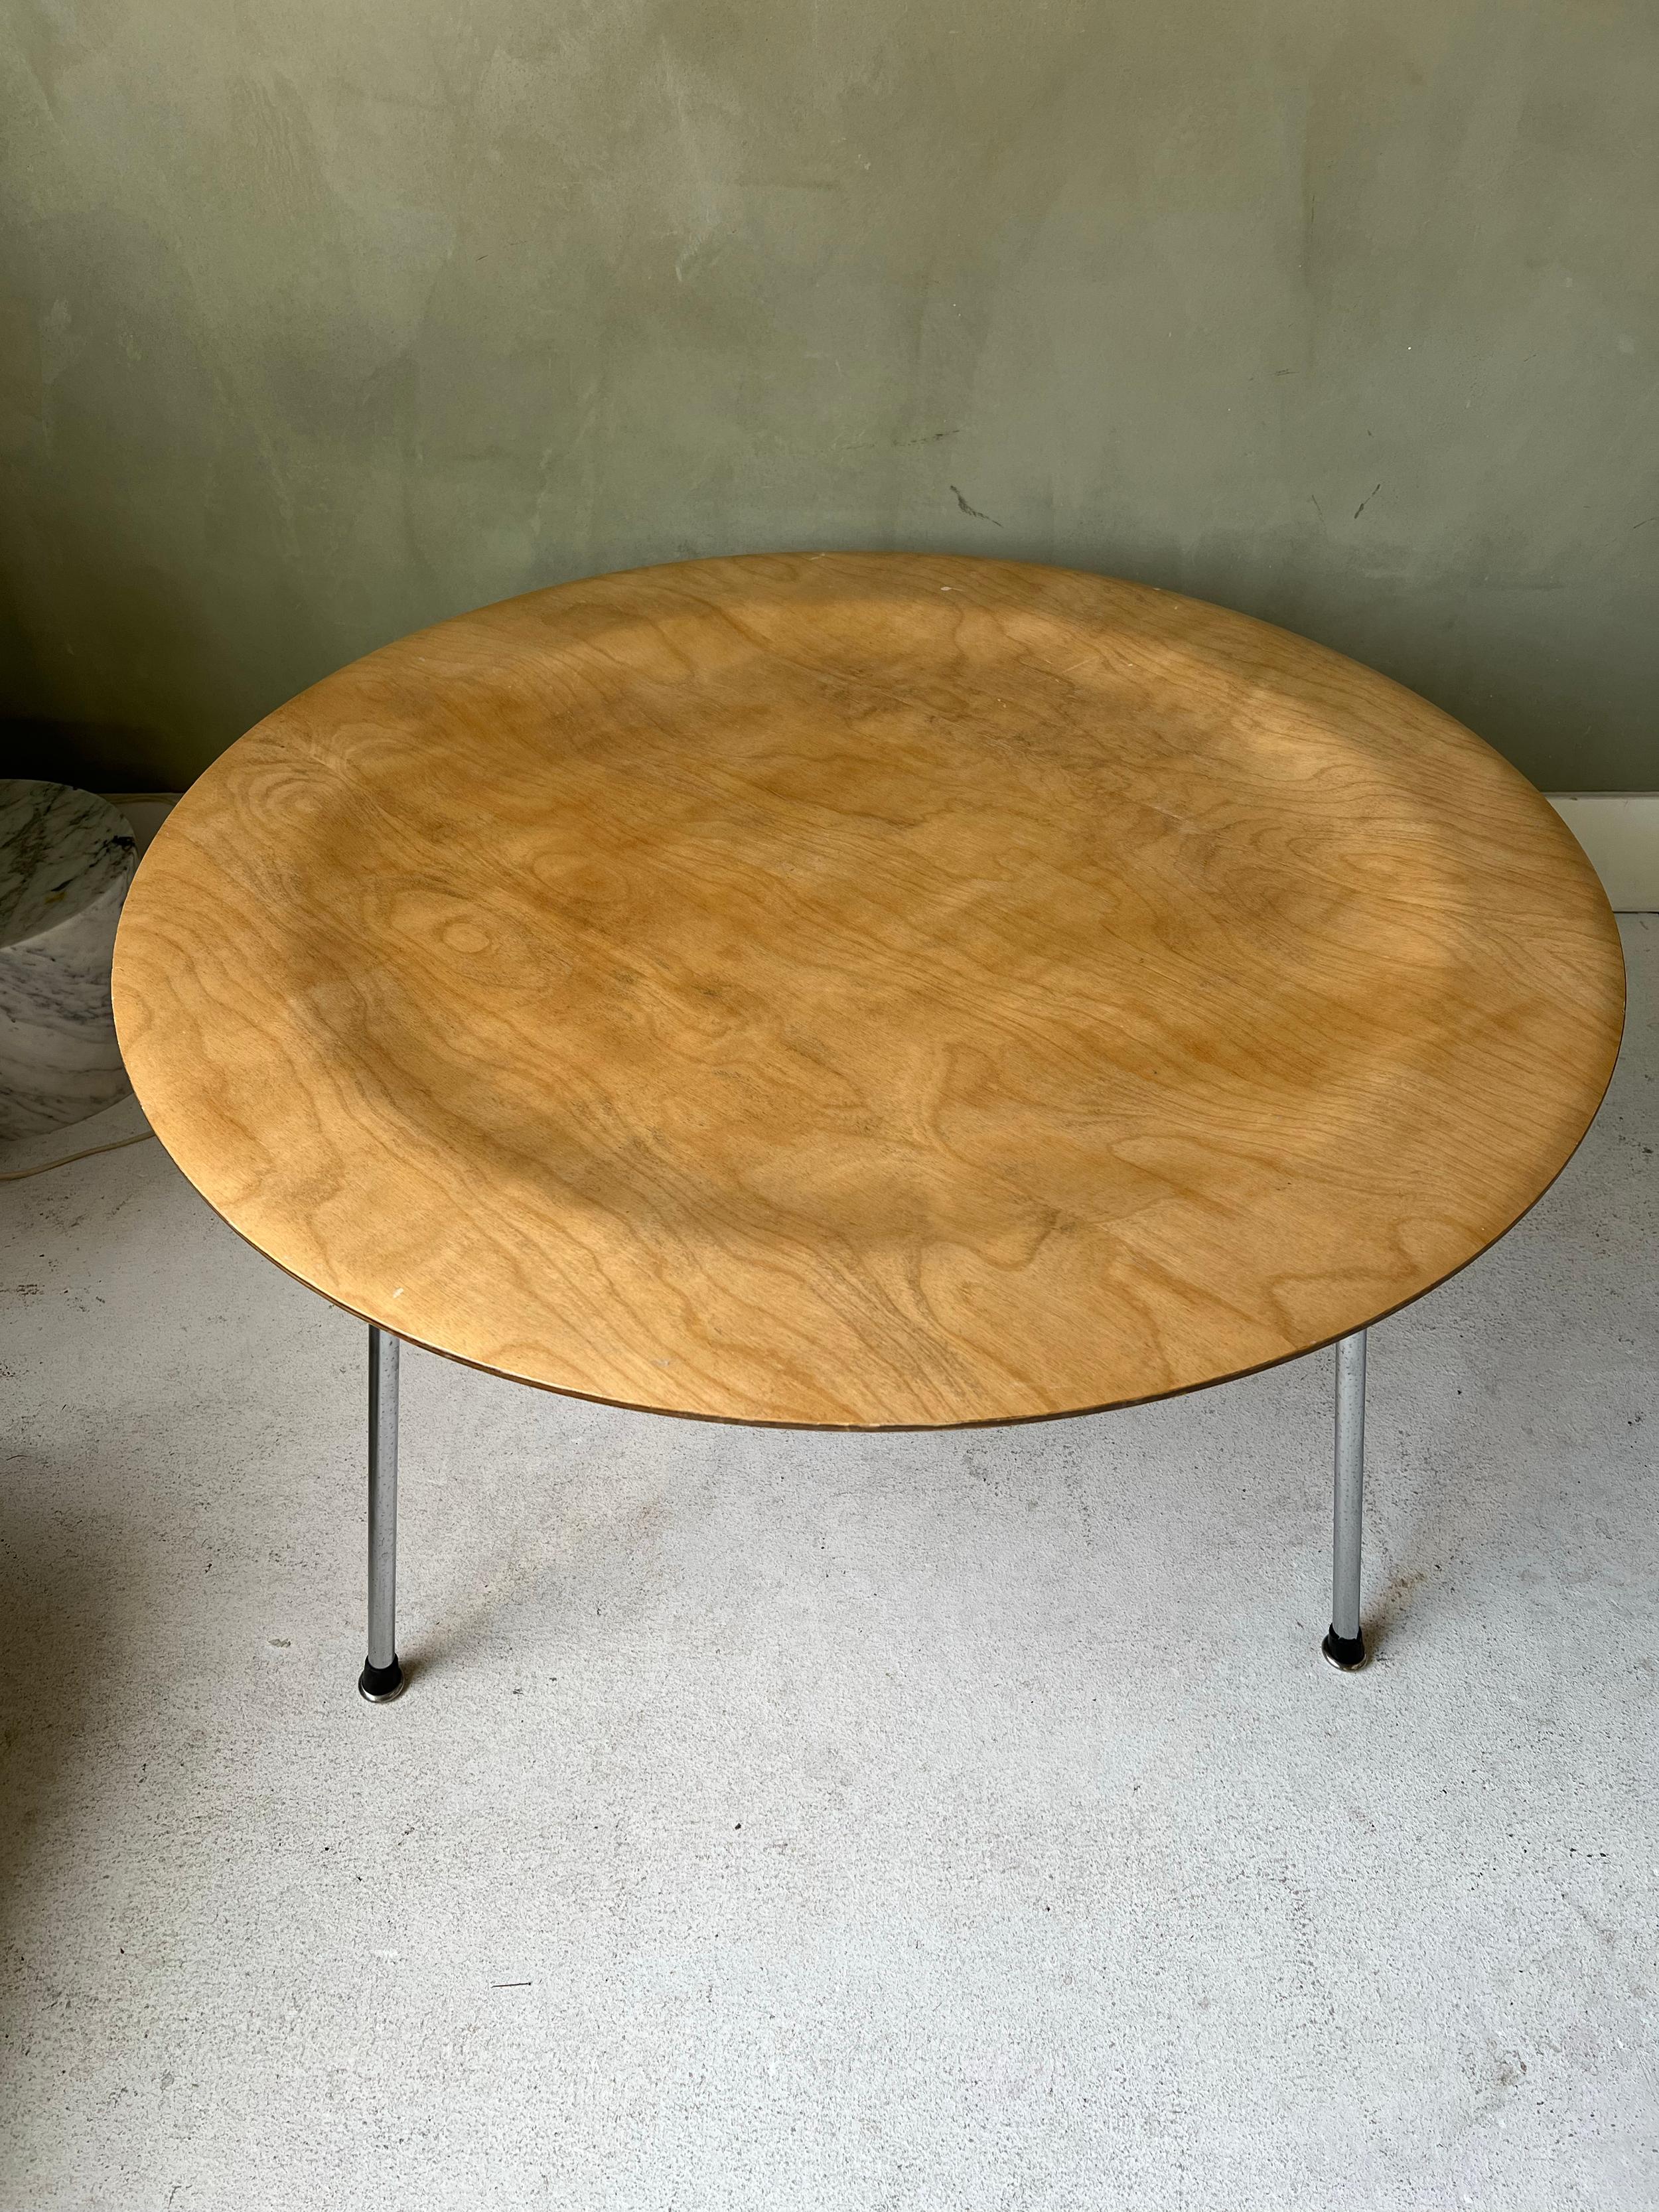 Vintage Eames CTM in original condition. Missing the label but all the glides are present. Great condition for a table of this age with just a few light spots on the top (see pictures). Beautiful table ready to use. 